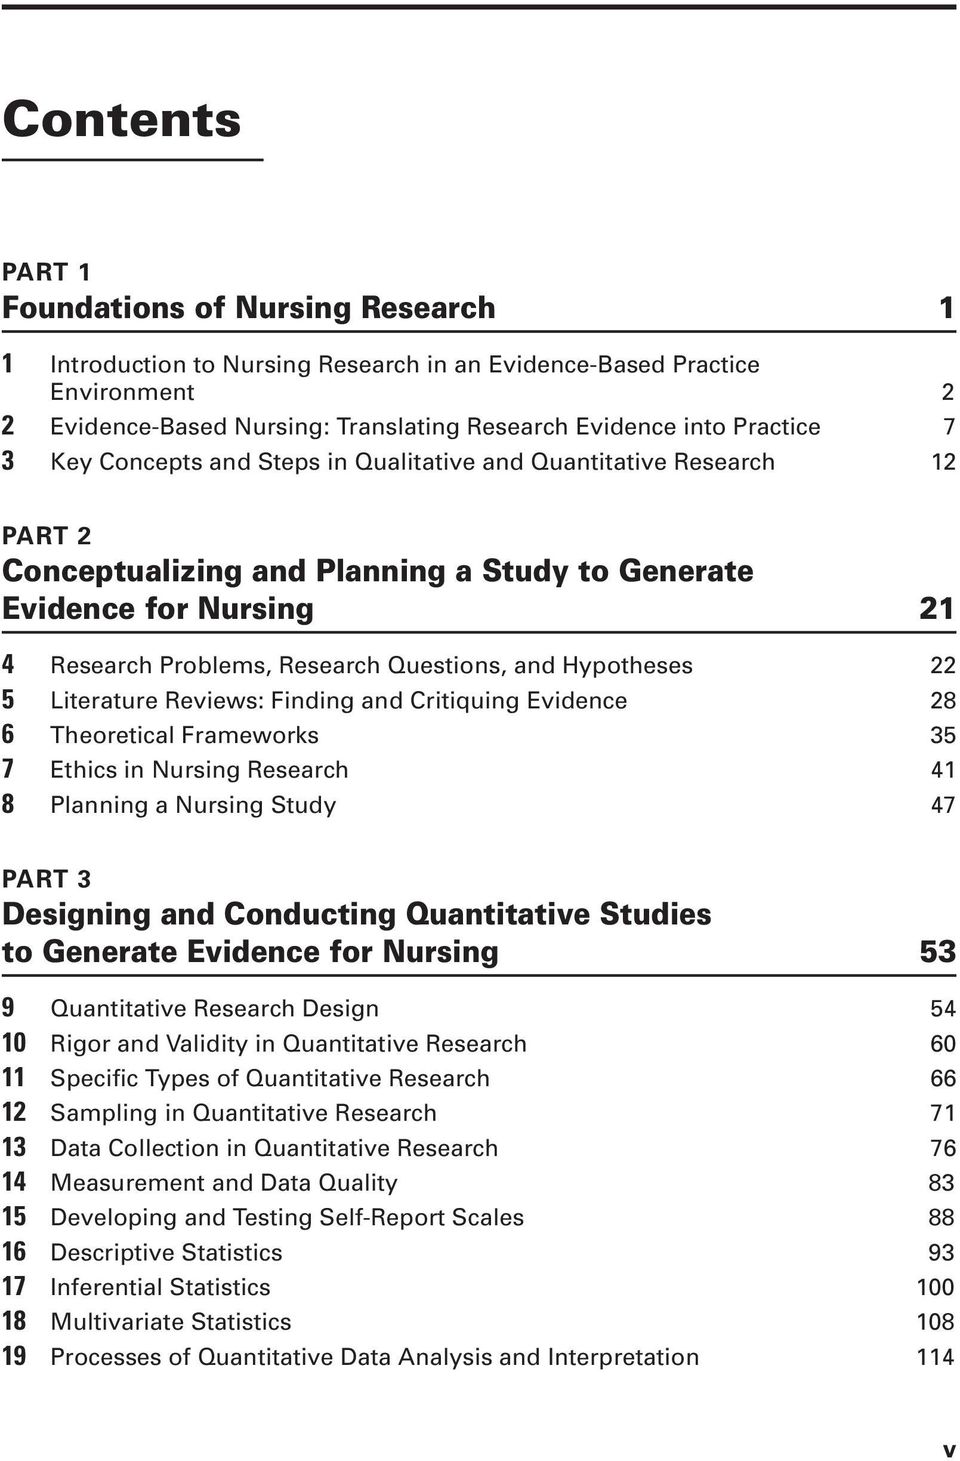 Nursing Research: Show me the evidence!